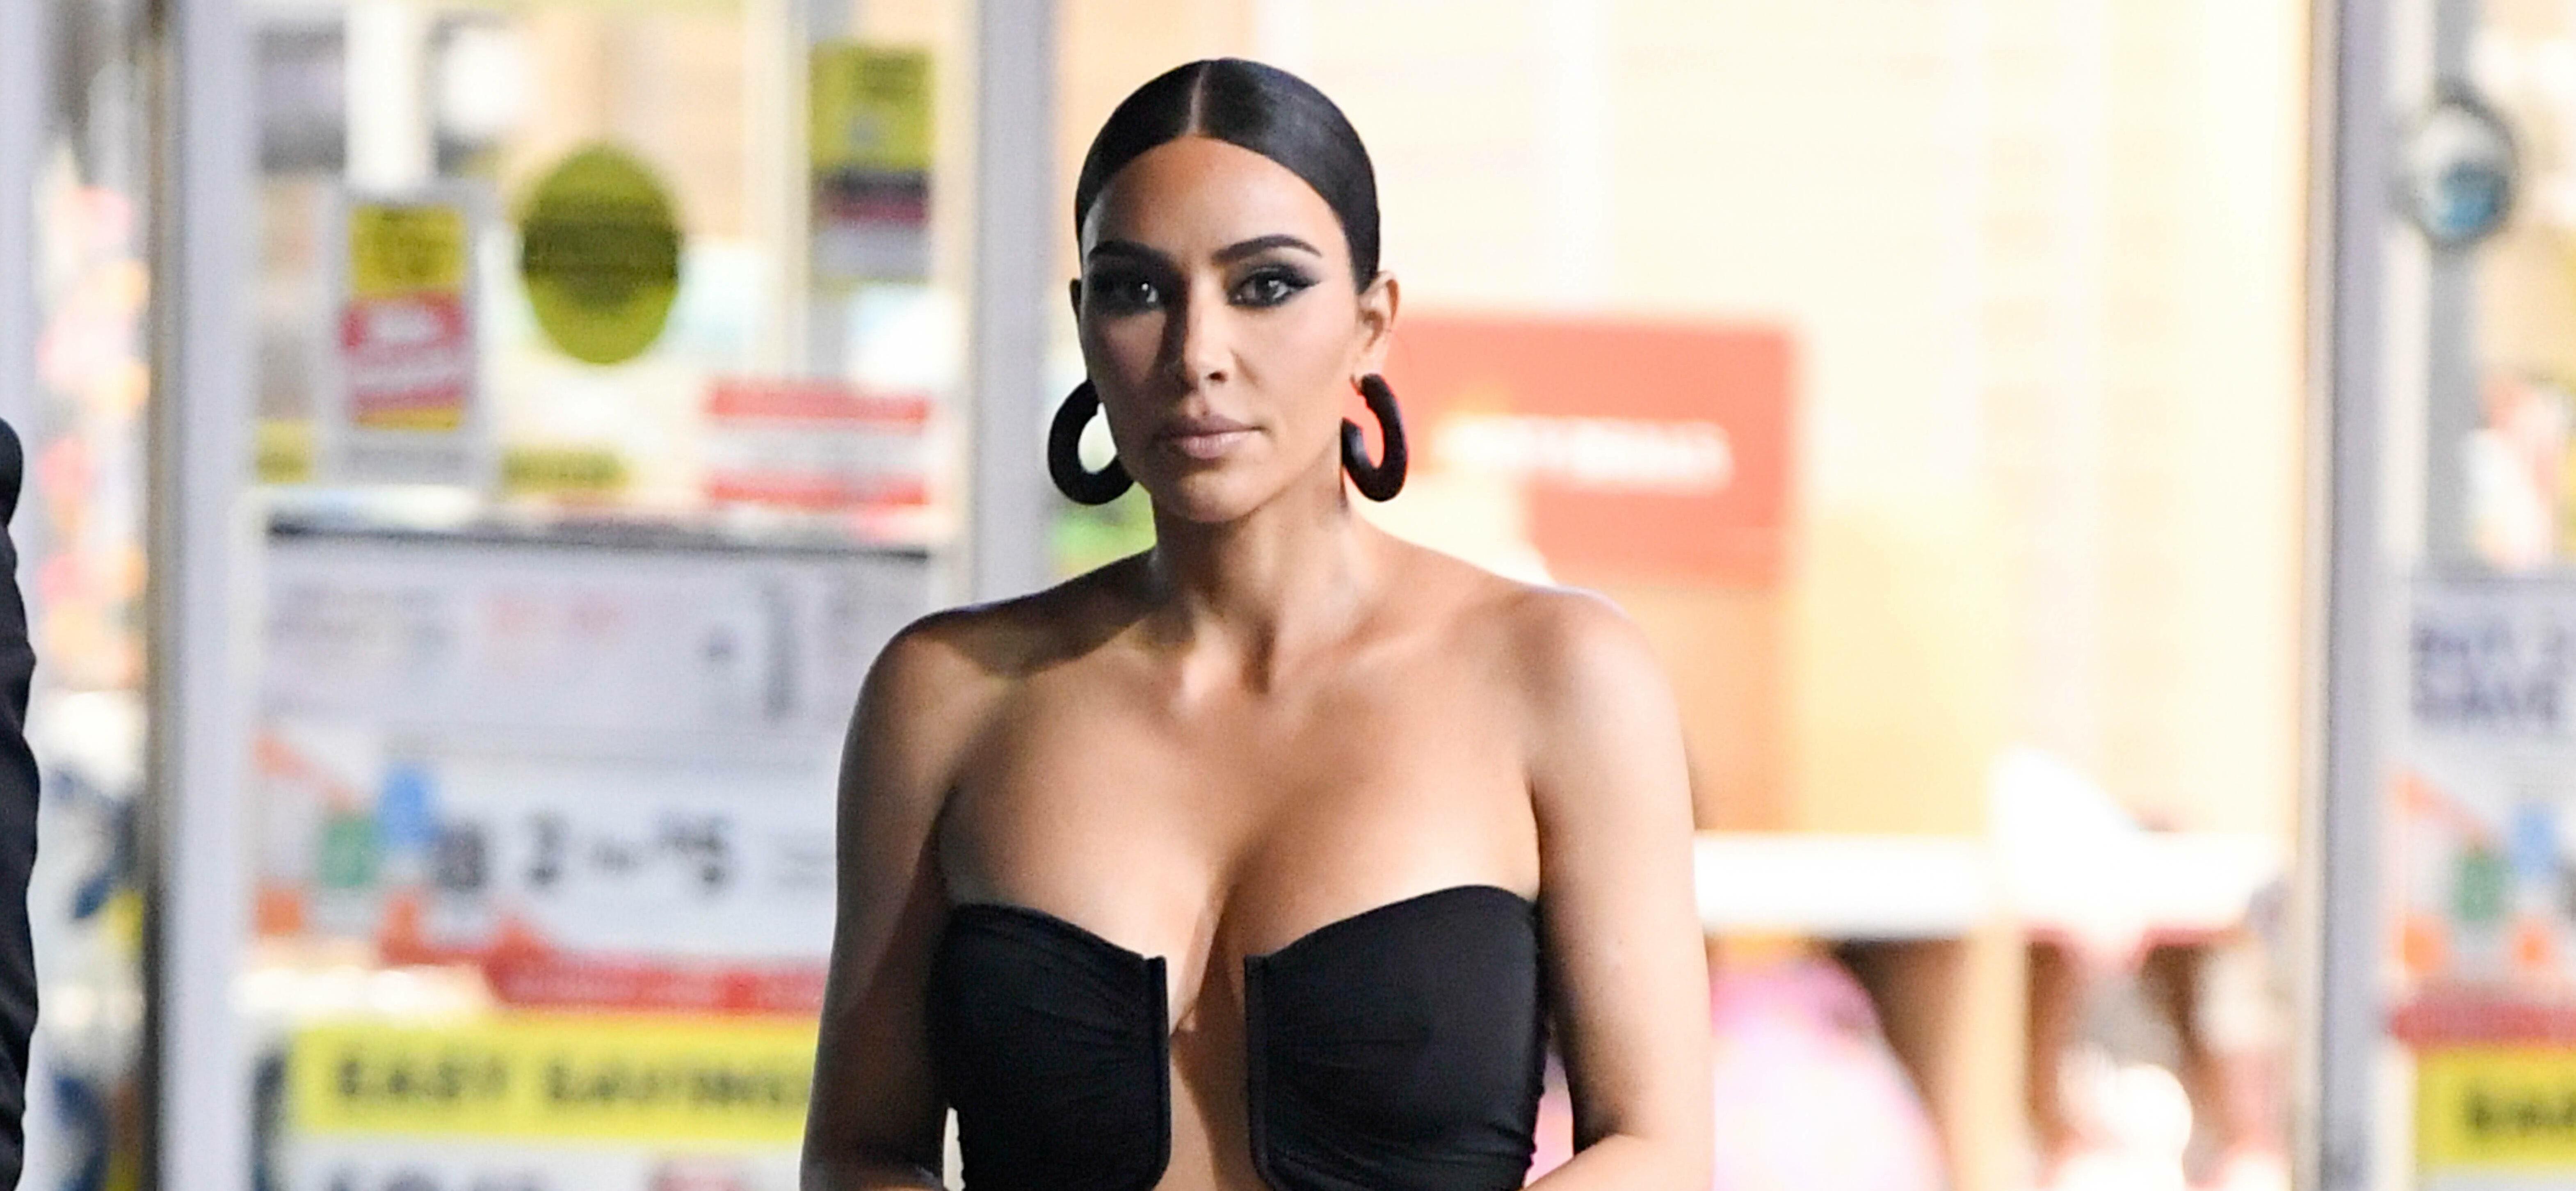 Kim Kardashian is seen at a convenience store after coming from Paris Hiltons wedding looking stunning in a Rick Owens dress with Balenciaga accessories